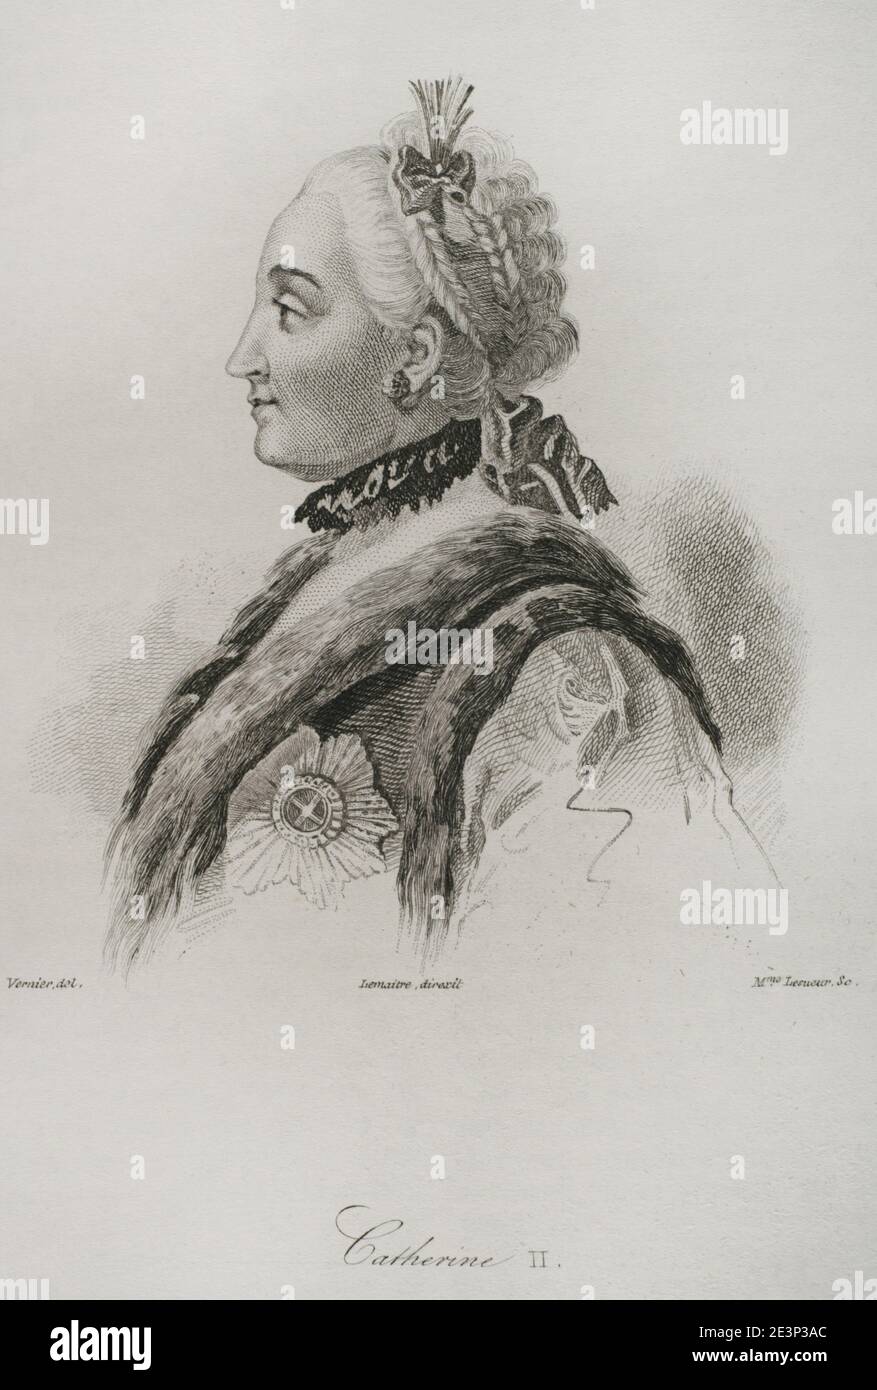 Catherine the Great or Catherine II (1729-1796). Empress of Rusia from 1762 to 1796. Portrait. Engraving by Lemaitre, Vernier and Lesueur. History of Russia by Jean Marie Chopin (1796-1870). Panorama Universal, Spanish edition, 1839. Stock Photo